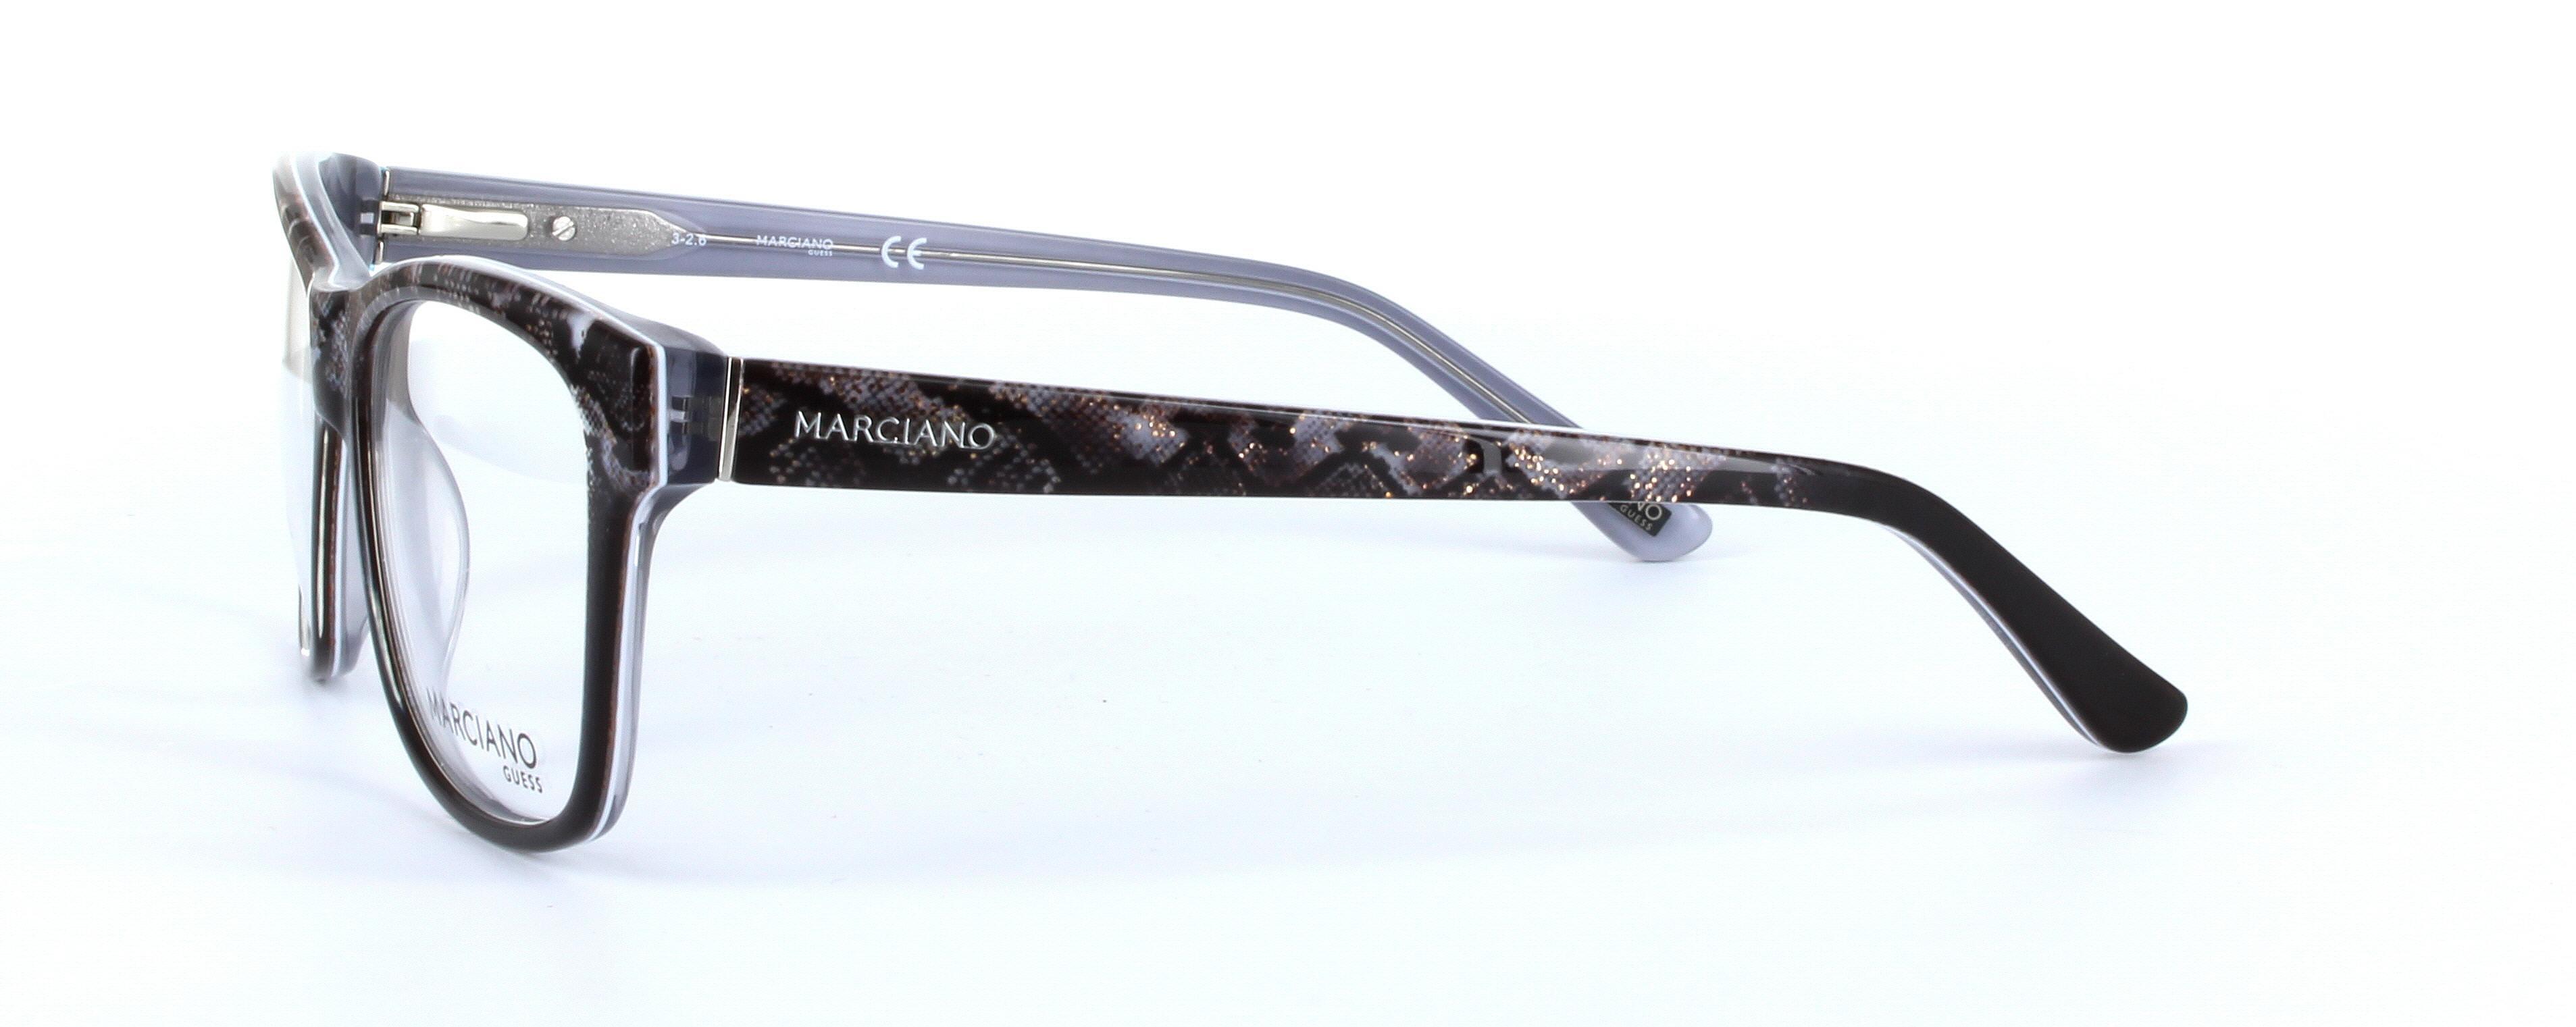 GUESS MARCIANO (GM0279-005) Black Full Rim Oval Rectangular Acetate Glasses - Image View 2